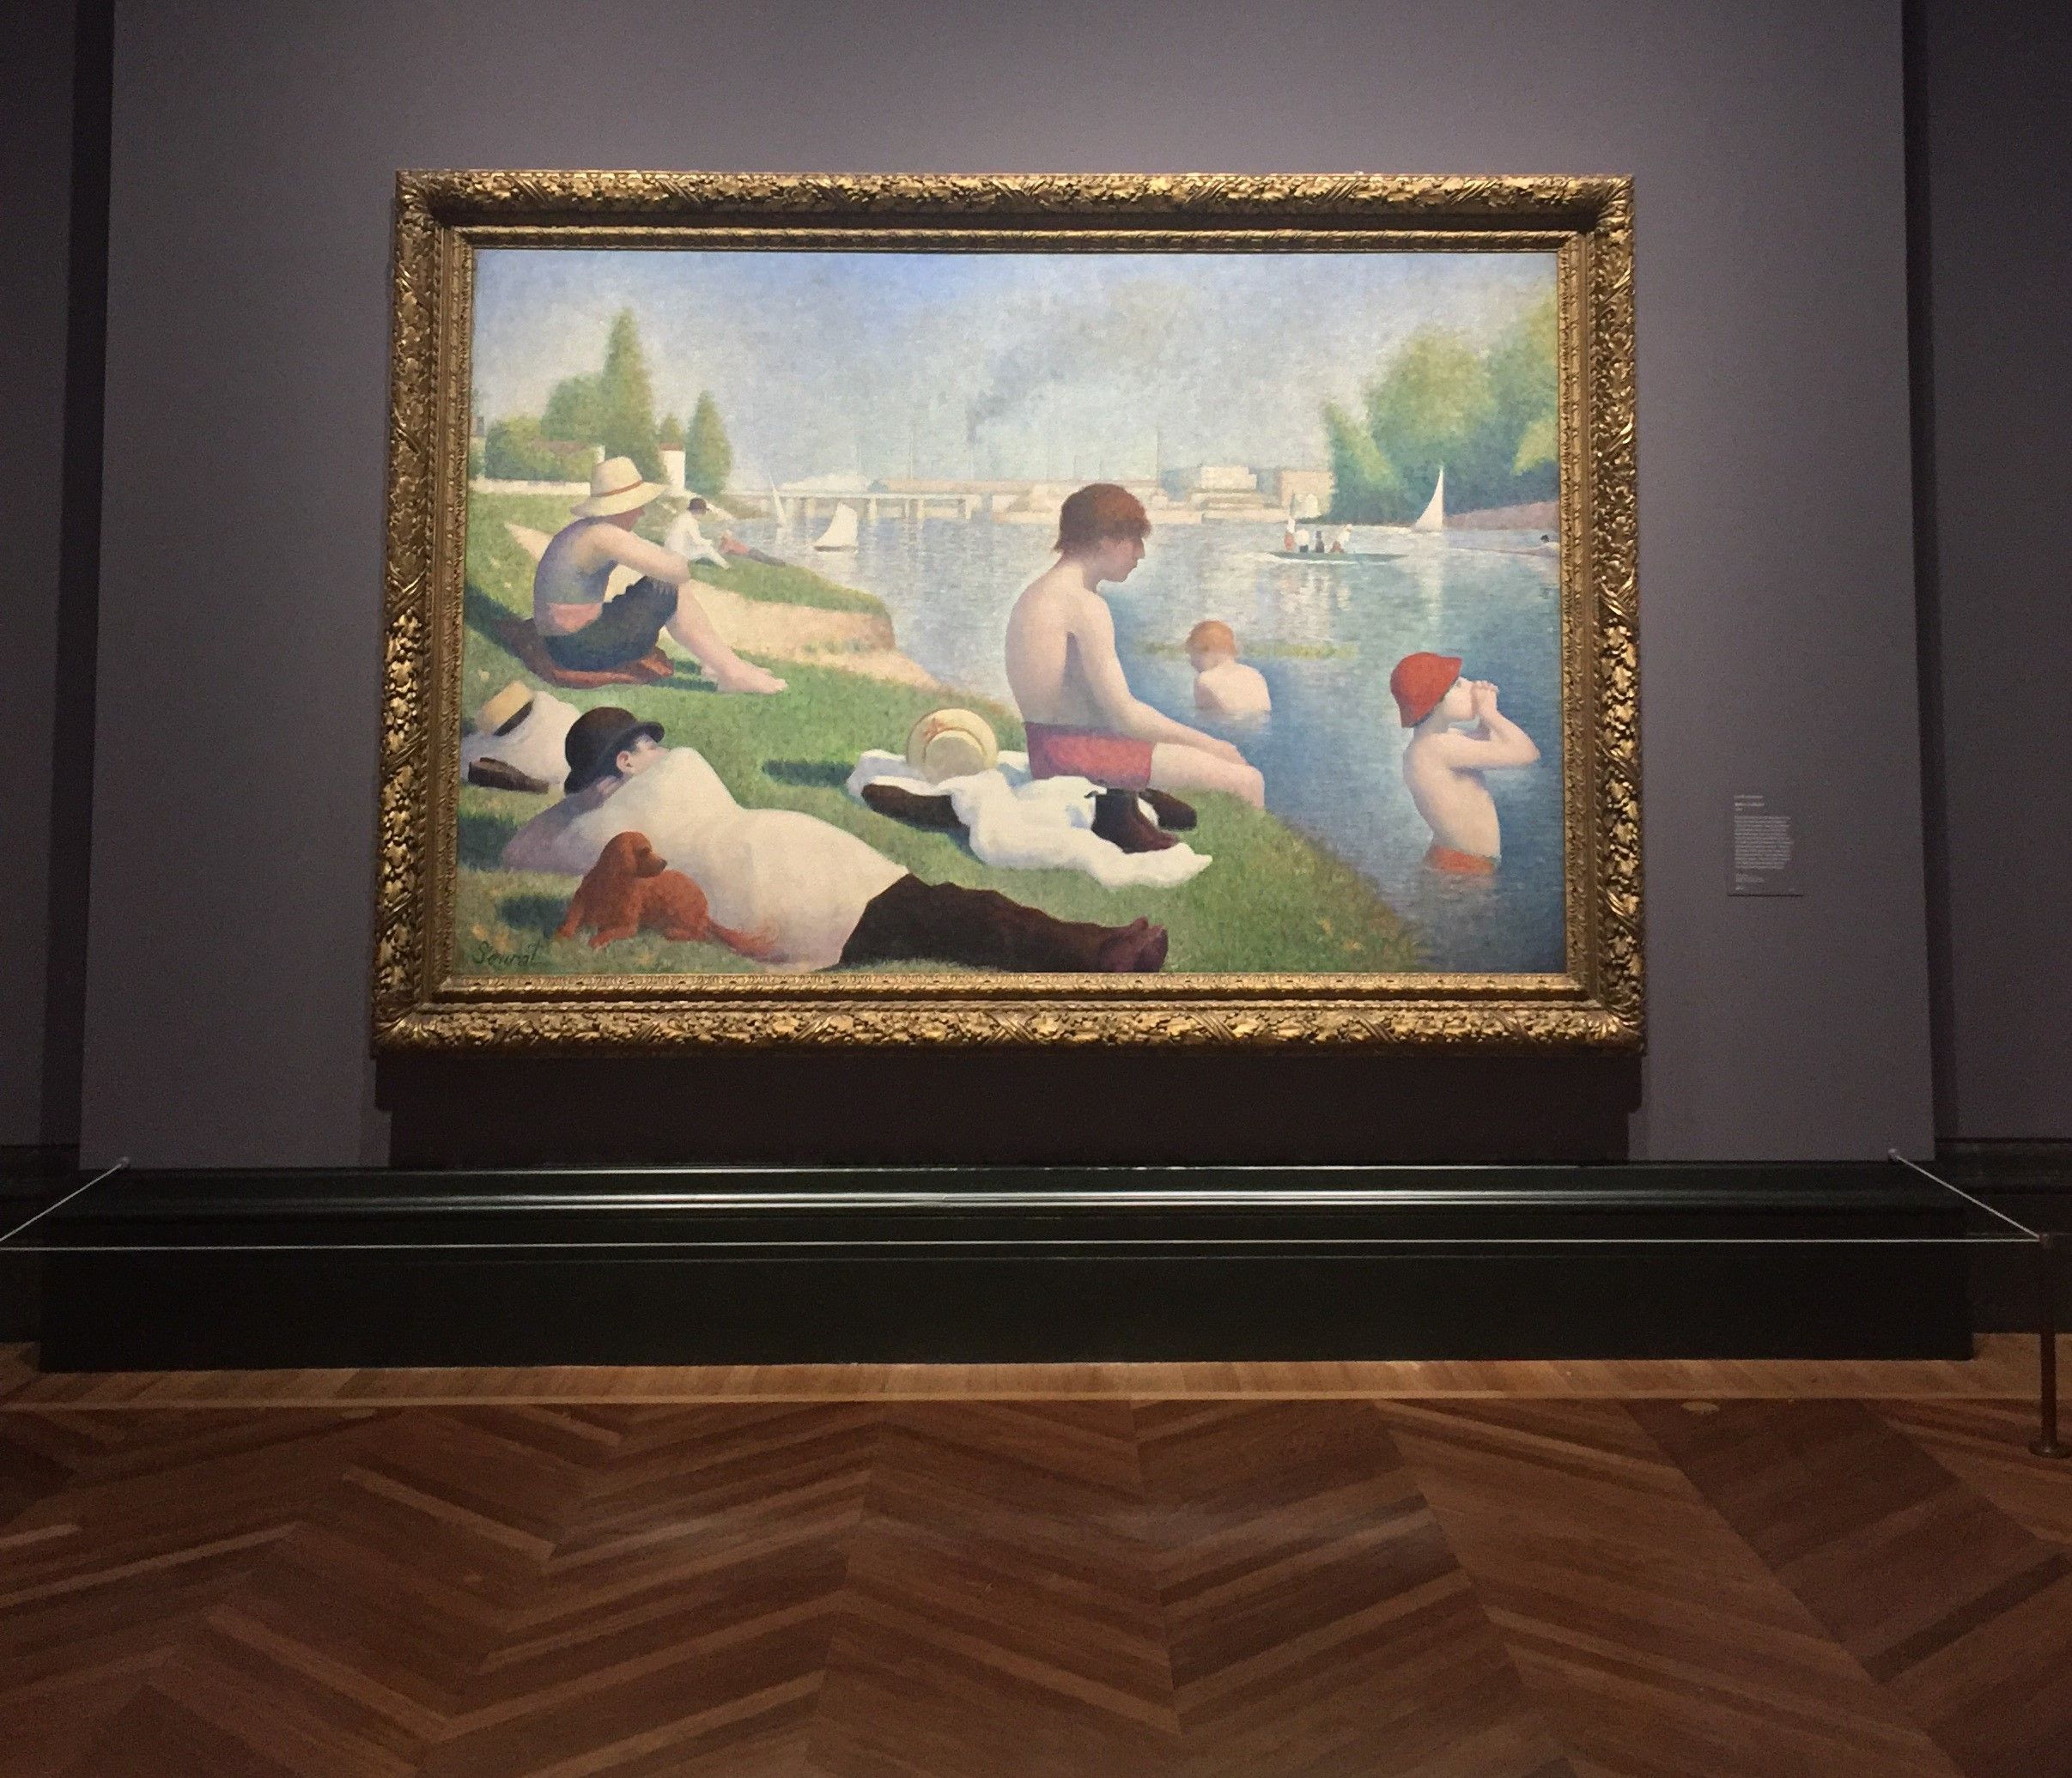 Courtauld Impressionists: from Manet to Cézanne, Exhibition, National Gallery, London, 17 Sep 2018-20 Jan 2019